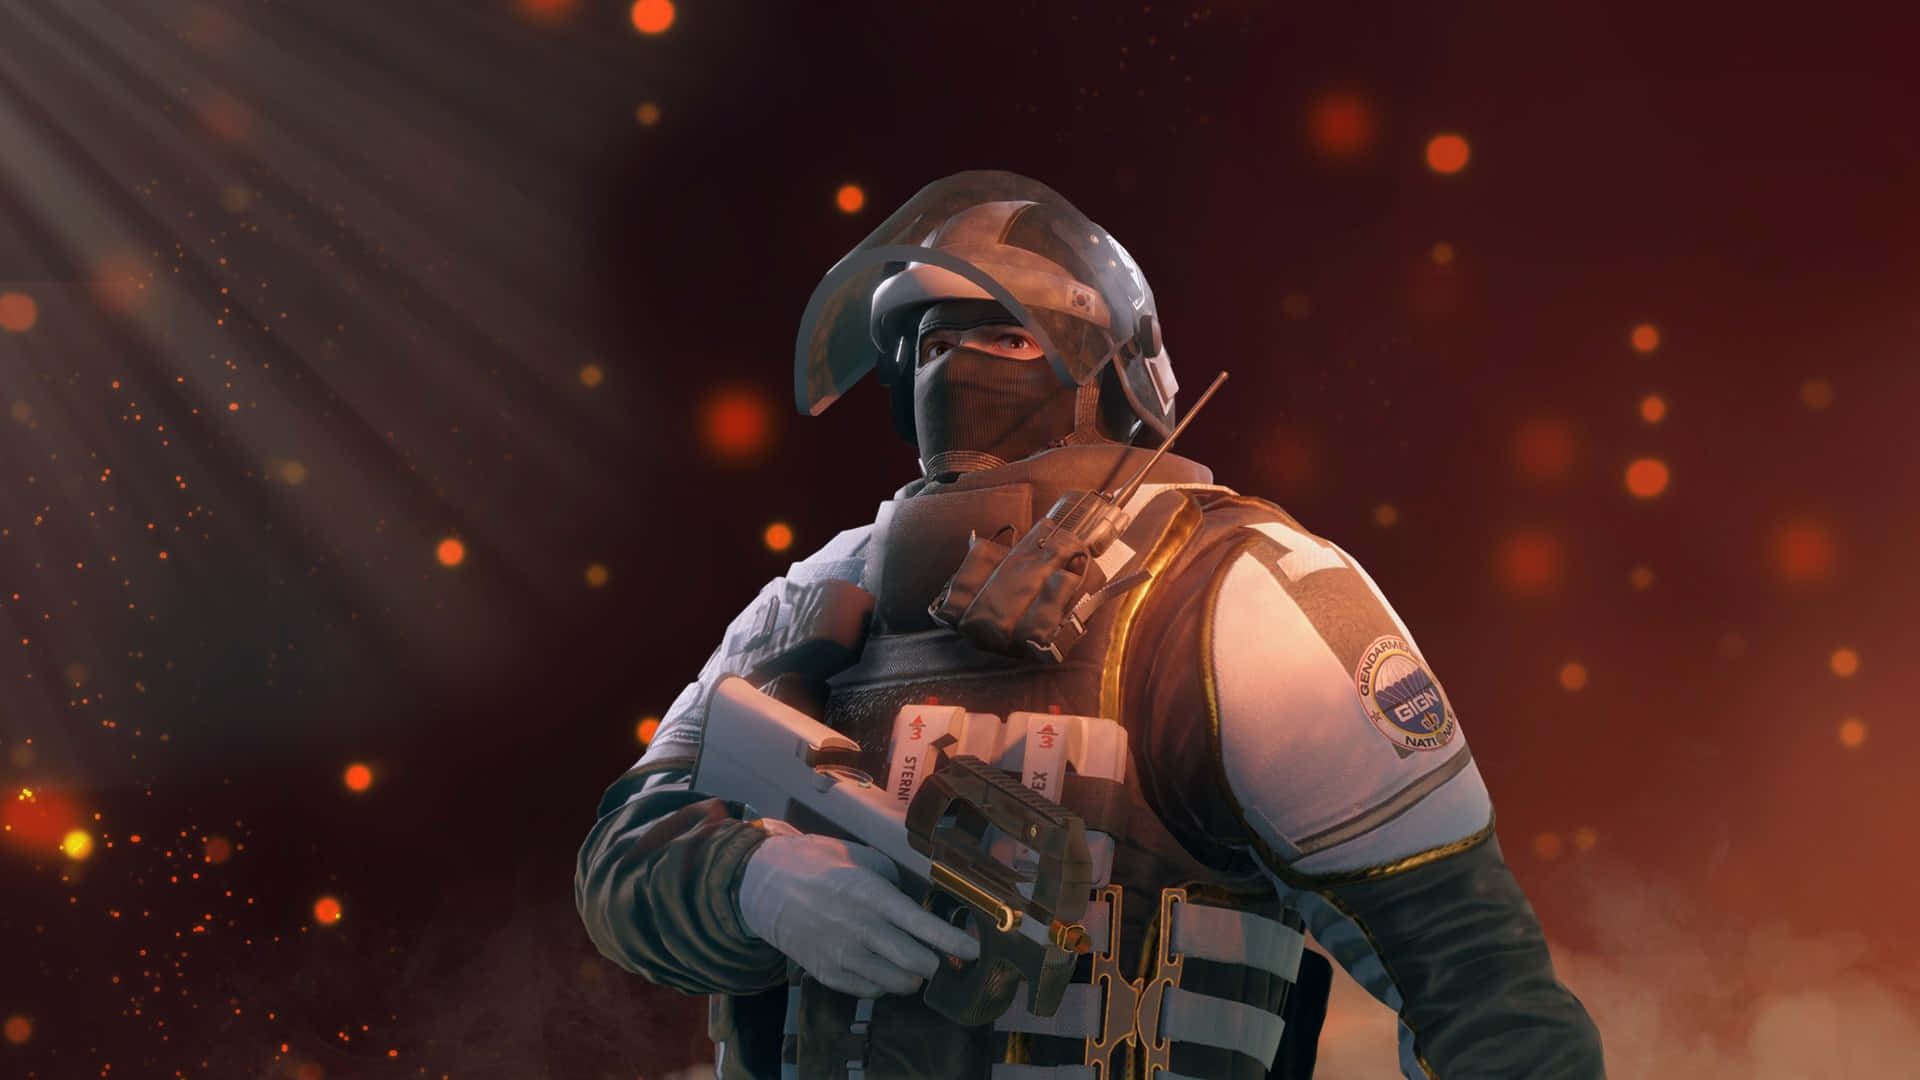 Doc in action, healing his teammates in Rainbow Six Siege Wallpaper